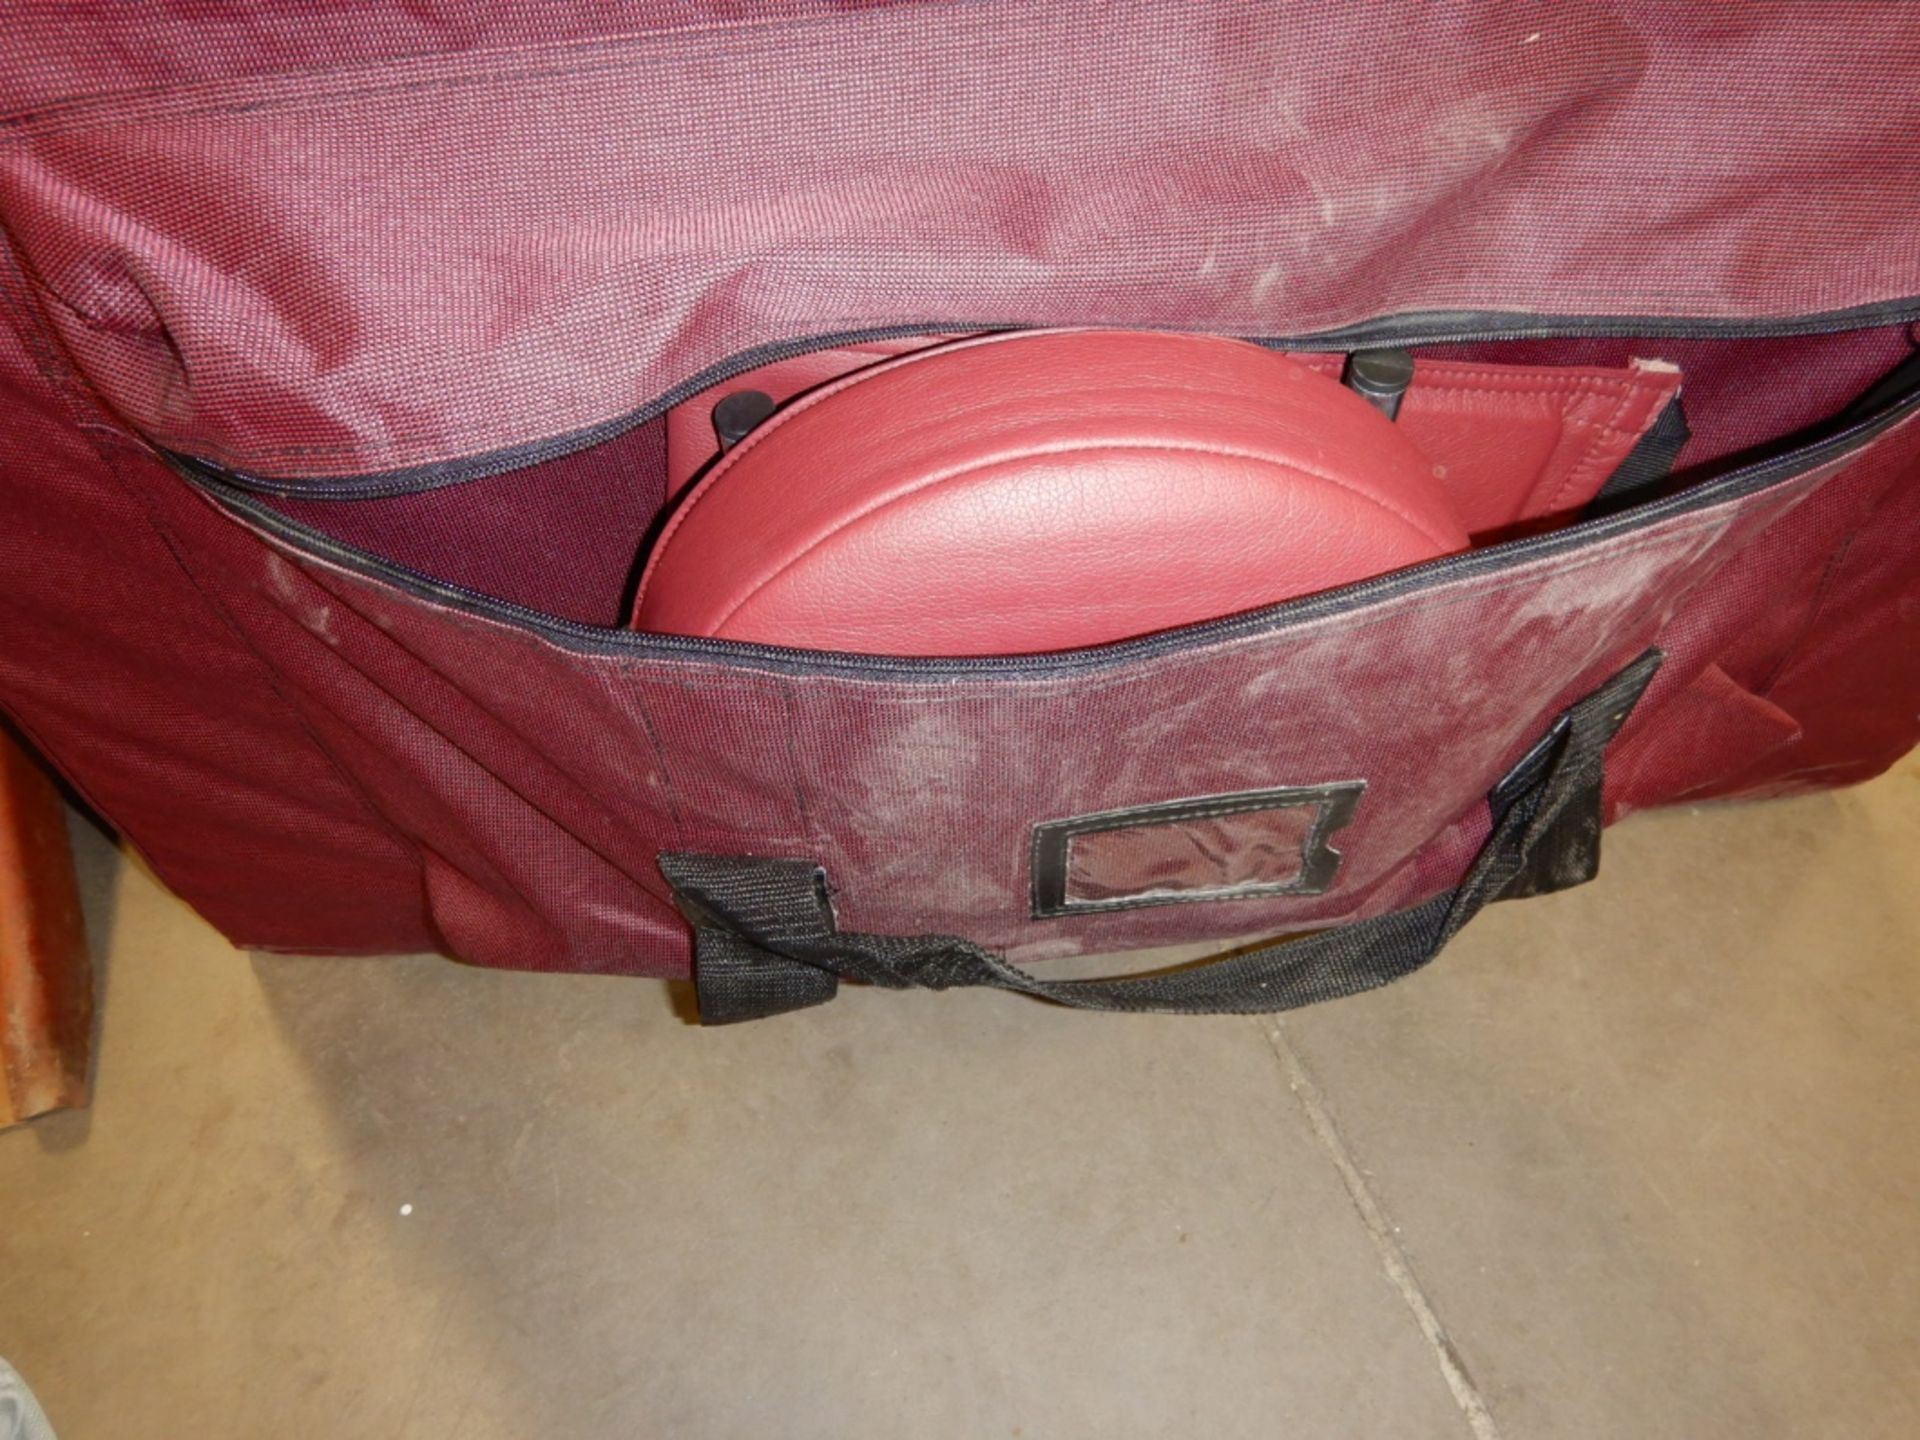 PORTABLE MASSAGE TABLE IN CARRYING CASE - Image 3 of 3